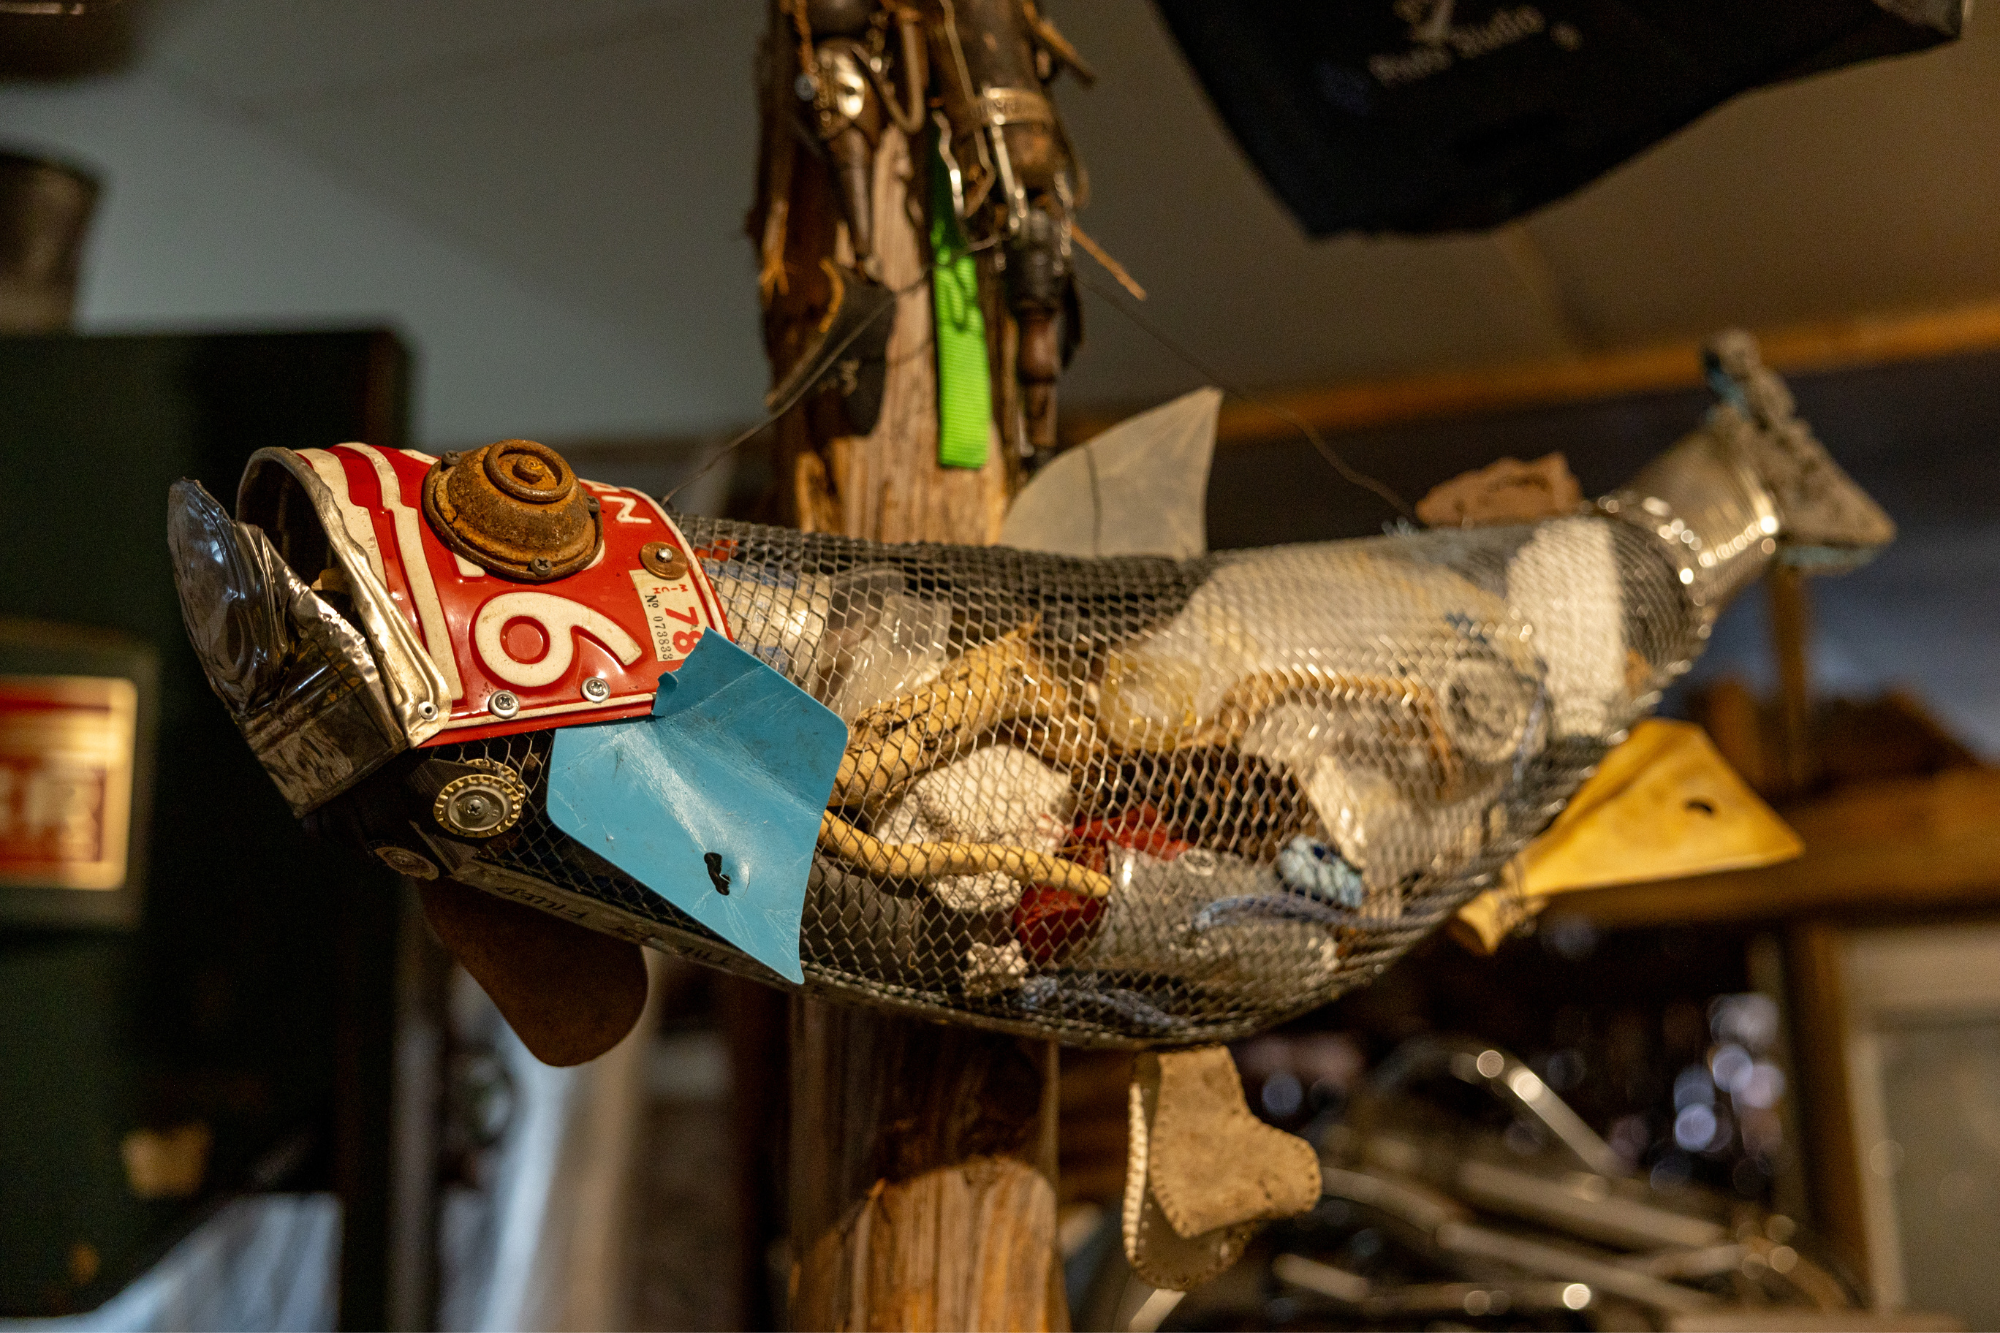 Ritch's "fish" made from recycled materials and used to collect beach items such as trash